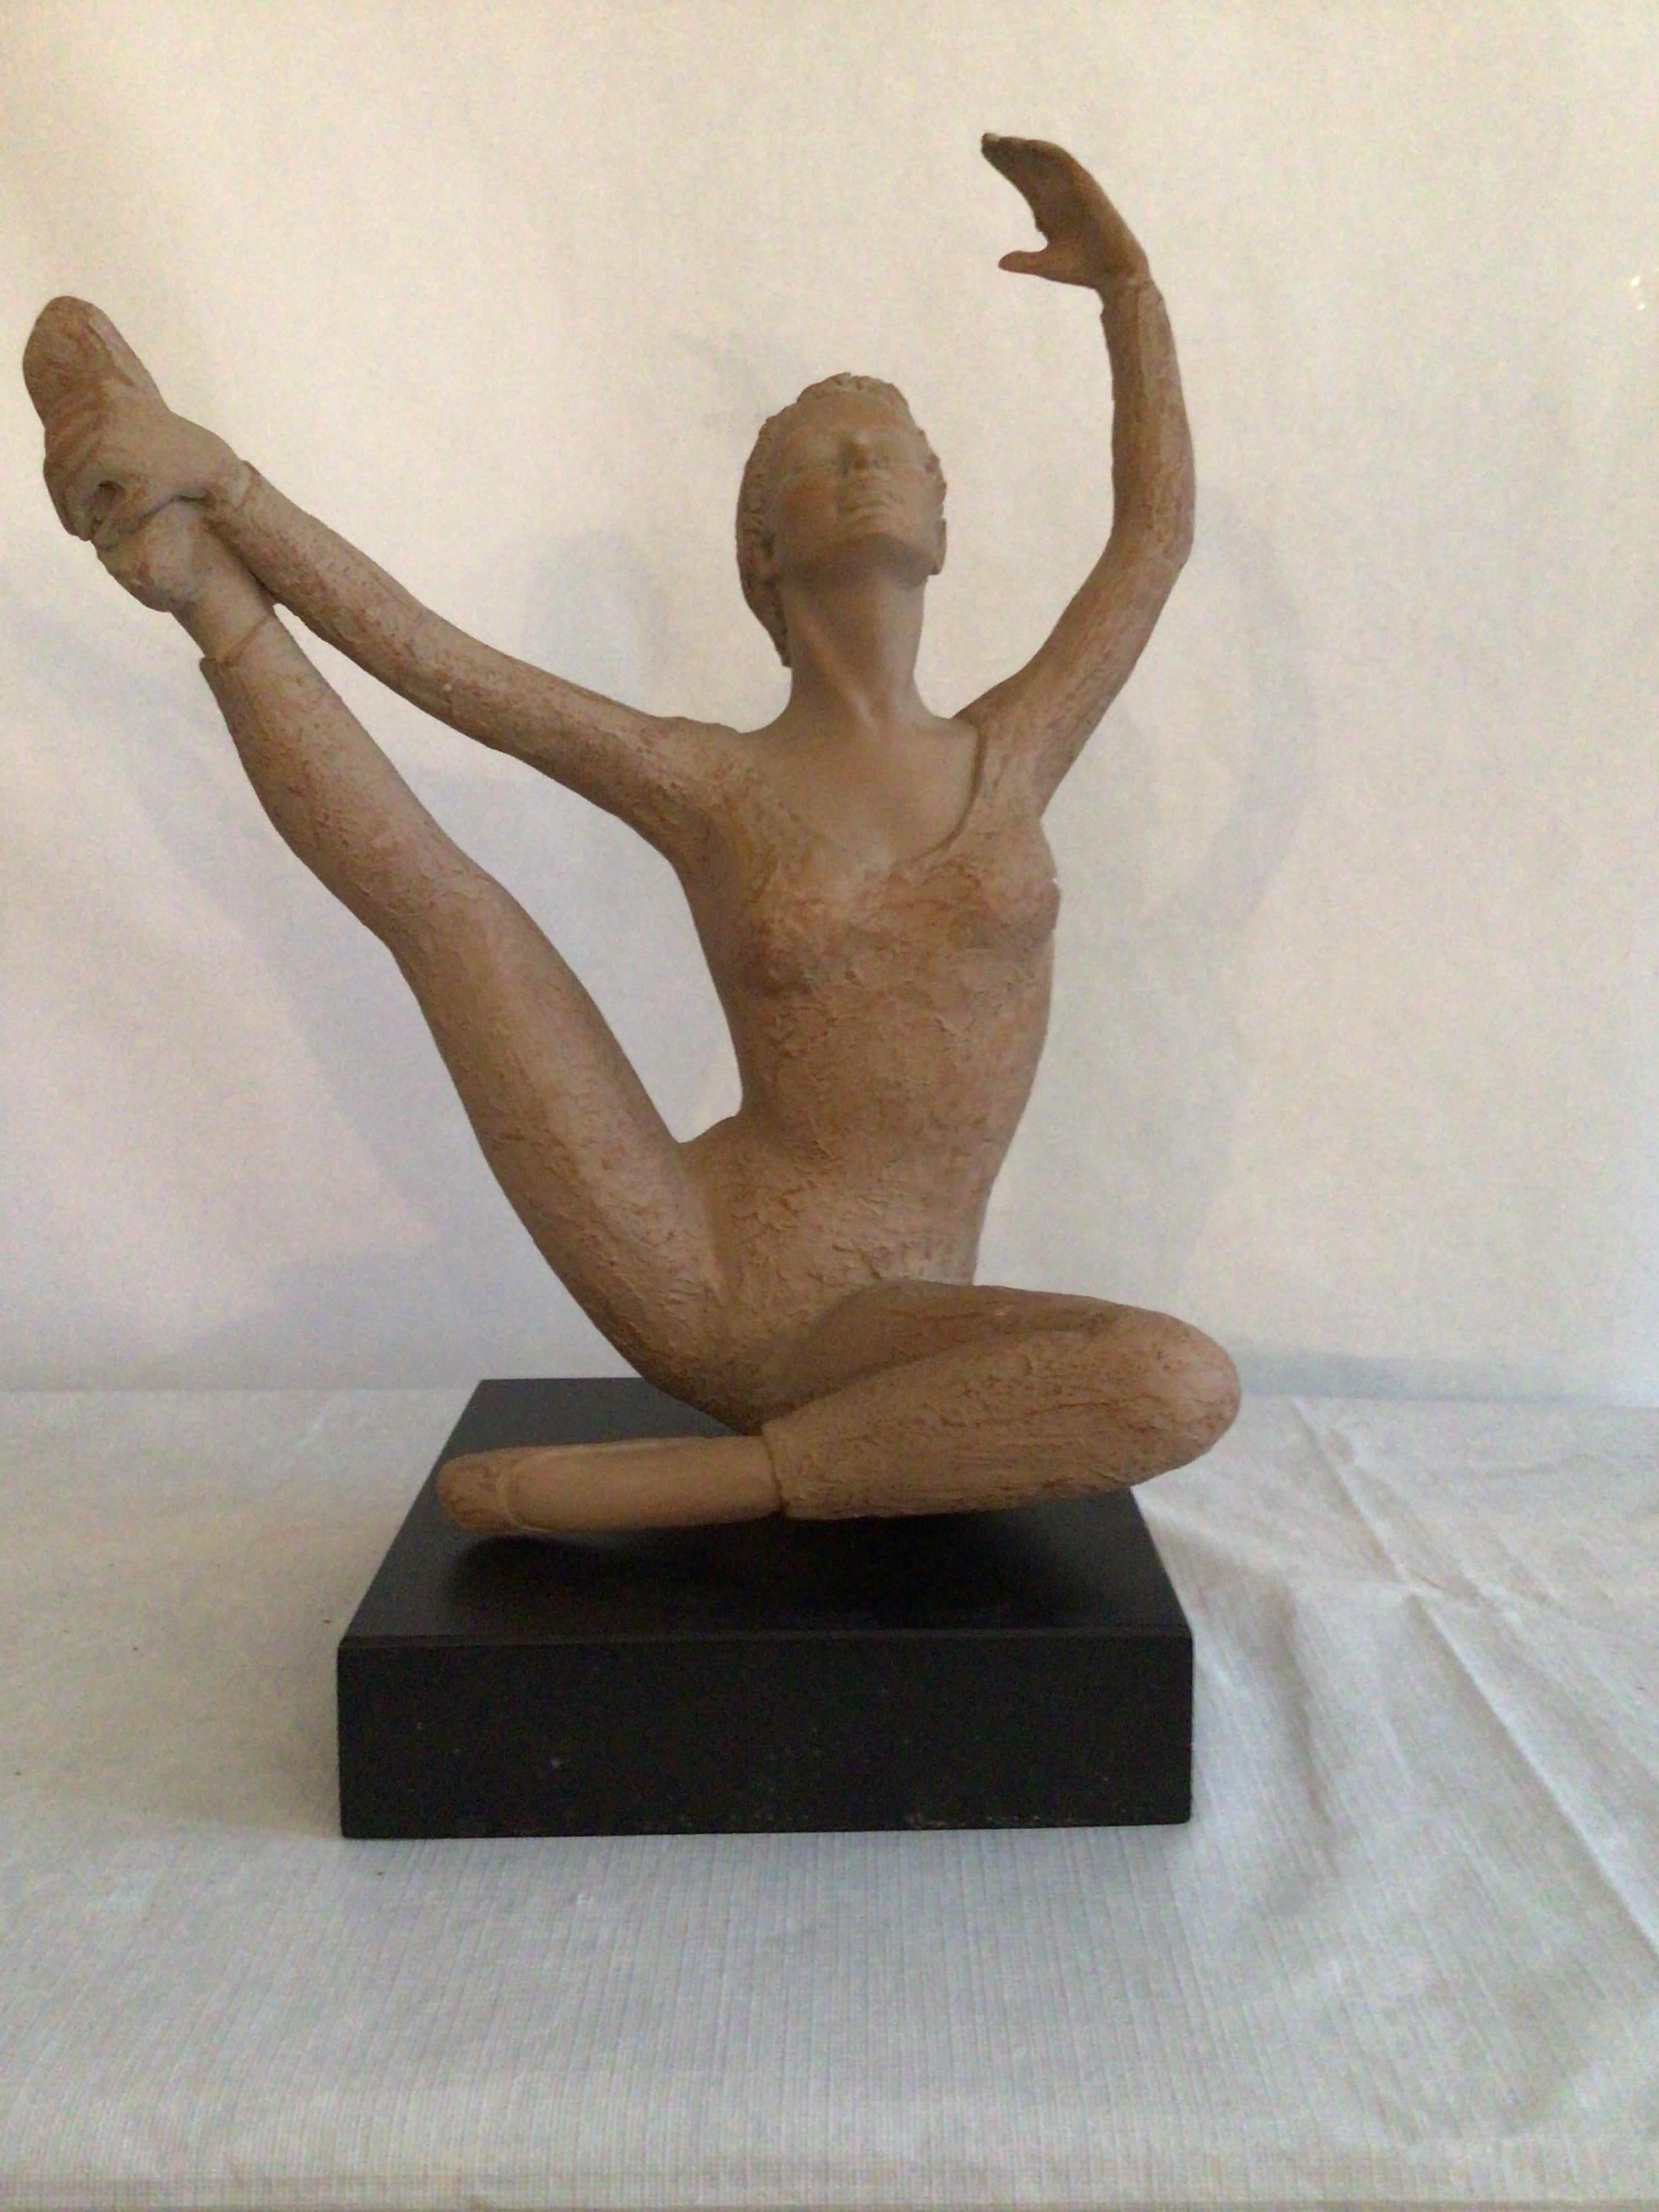 2001 Terracotta Sculpture On Wood Base Of A Ballerina Dancer Stamped AMR 
Black Painted Wood Base
Figure wears a textured leotard 
Seated with leg extended stretching
Yoga or Ballet pose
Holes Where Mounted (as shown)
